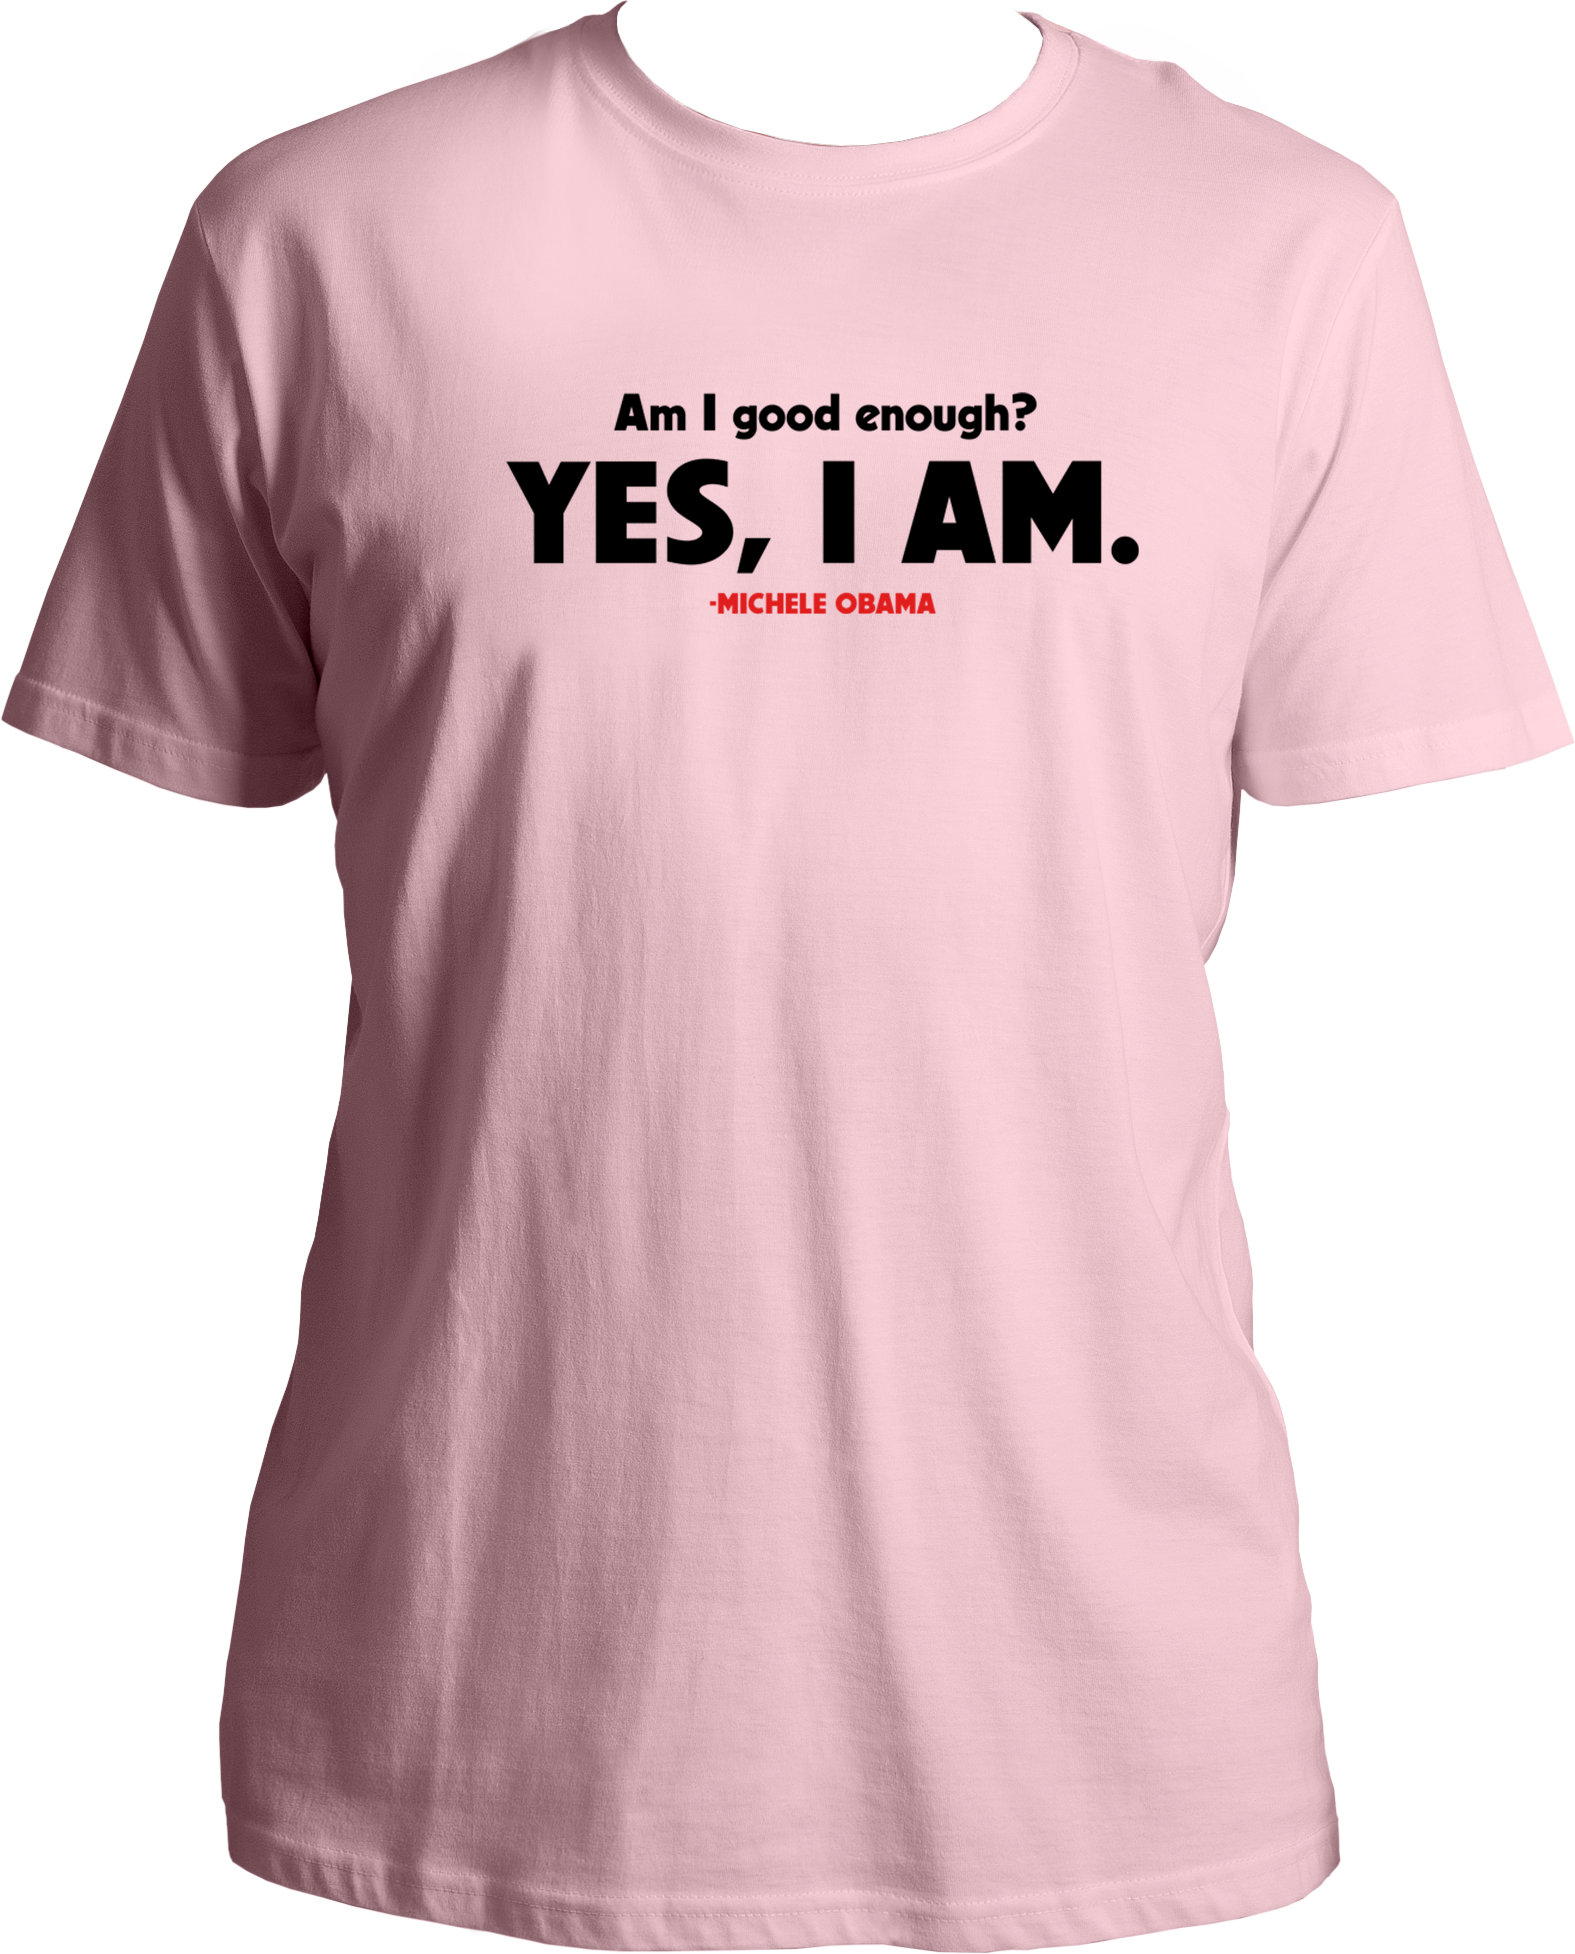 T-shirt for all the women out there with the Michelle Obama's Quote printed- Am i good enough, Yes i am.